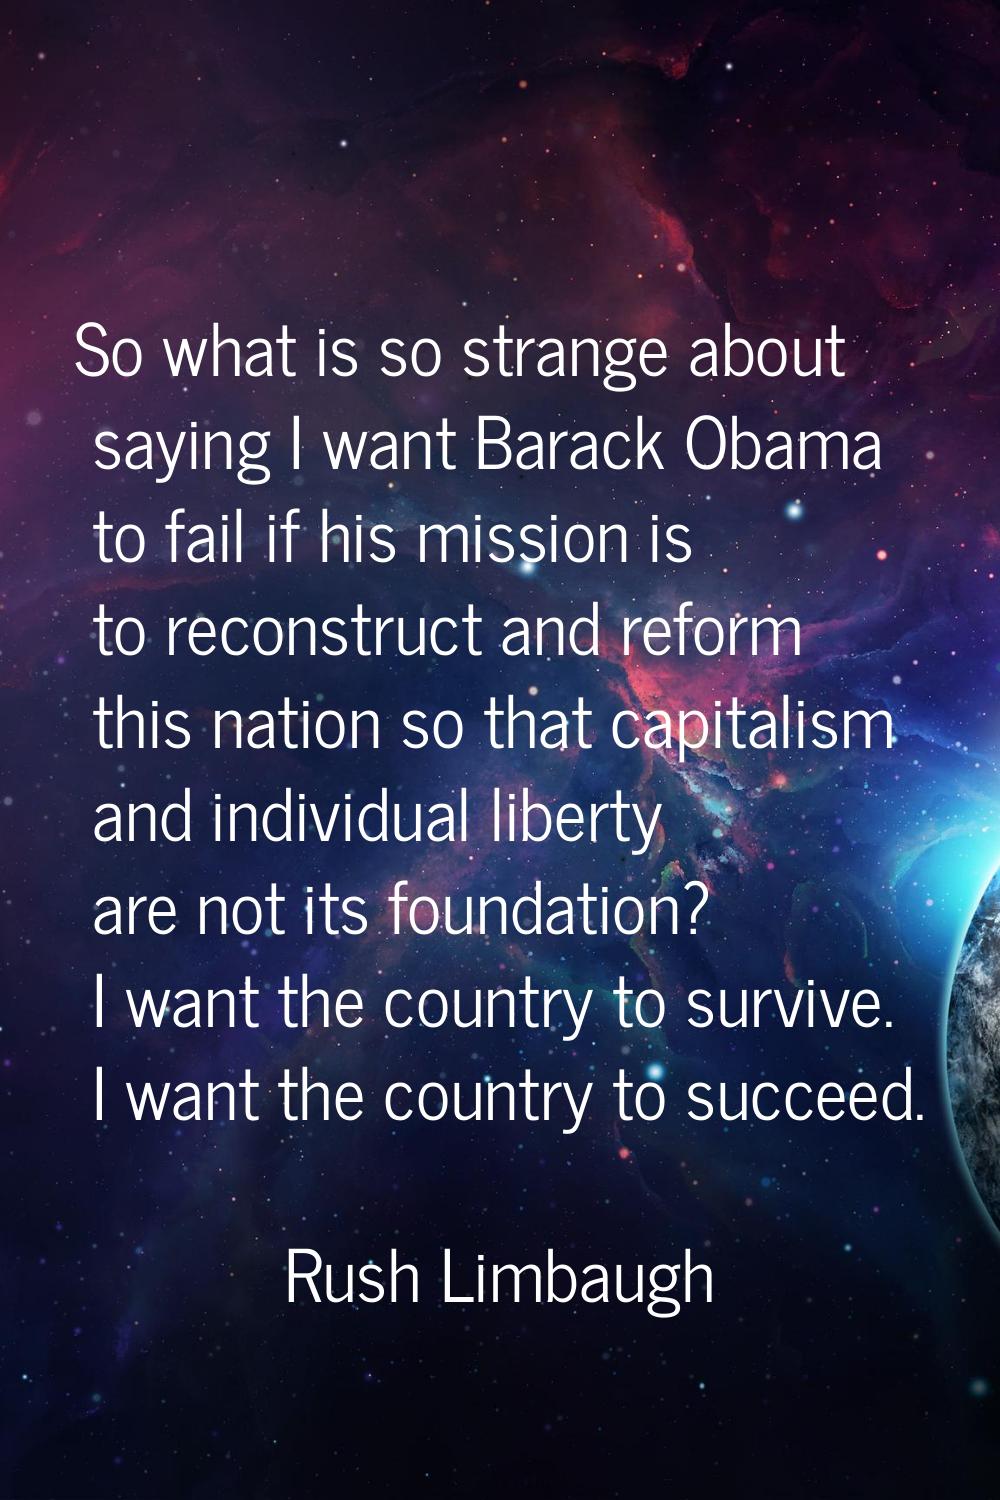 So what is so strange about saying I want Barack Obama to fail if his mission is to reconstruct and